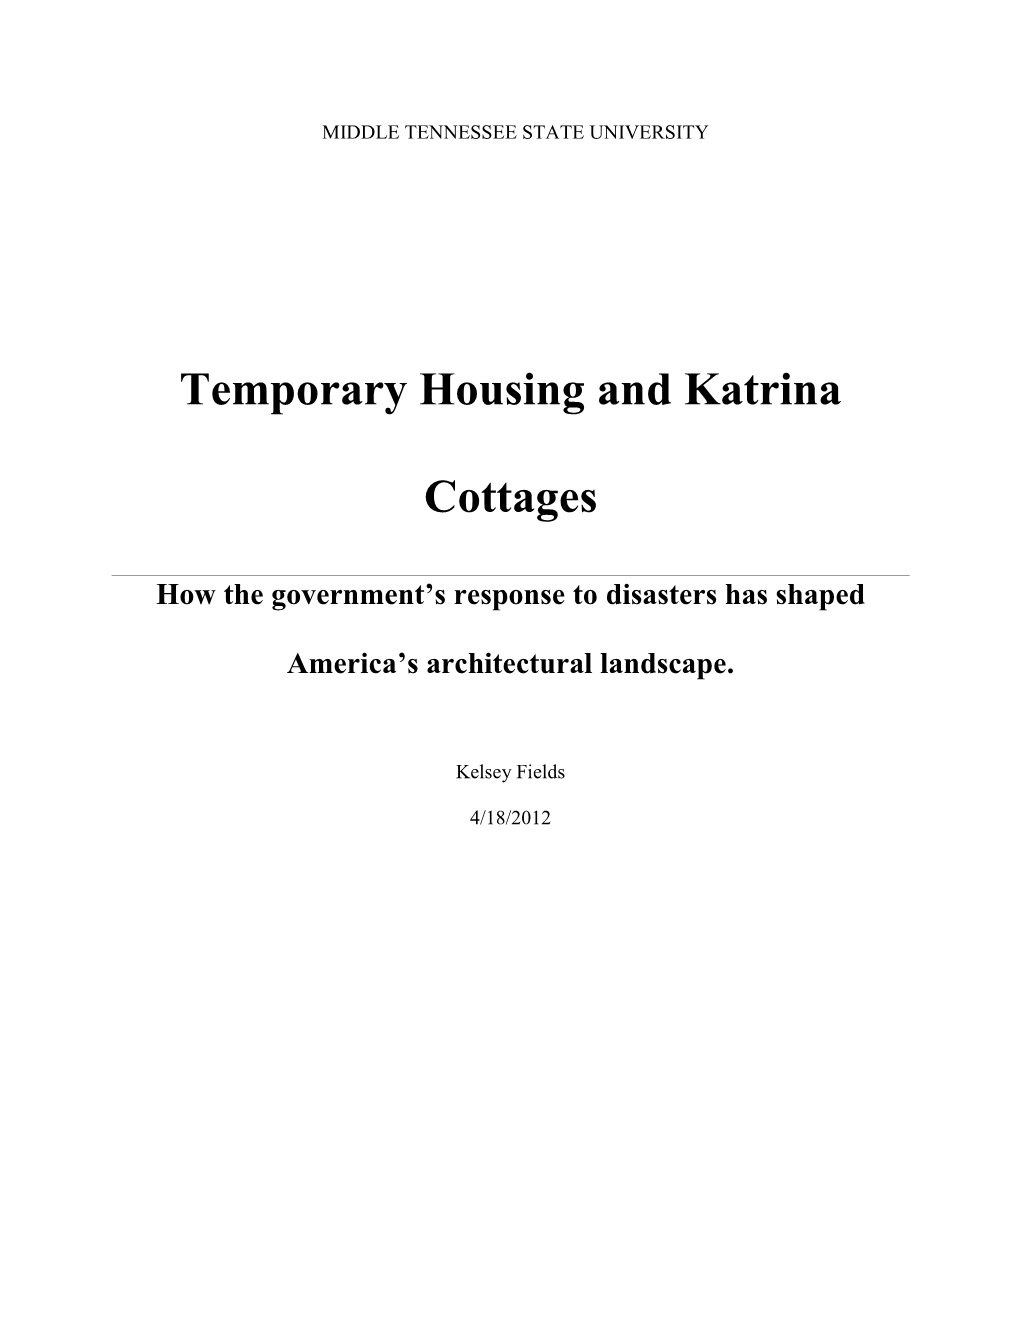 Temporary Housing and Katrina Cottages